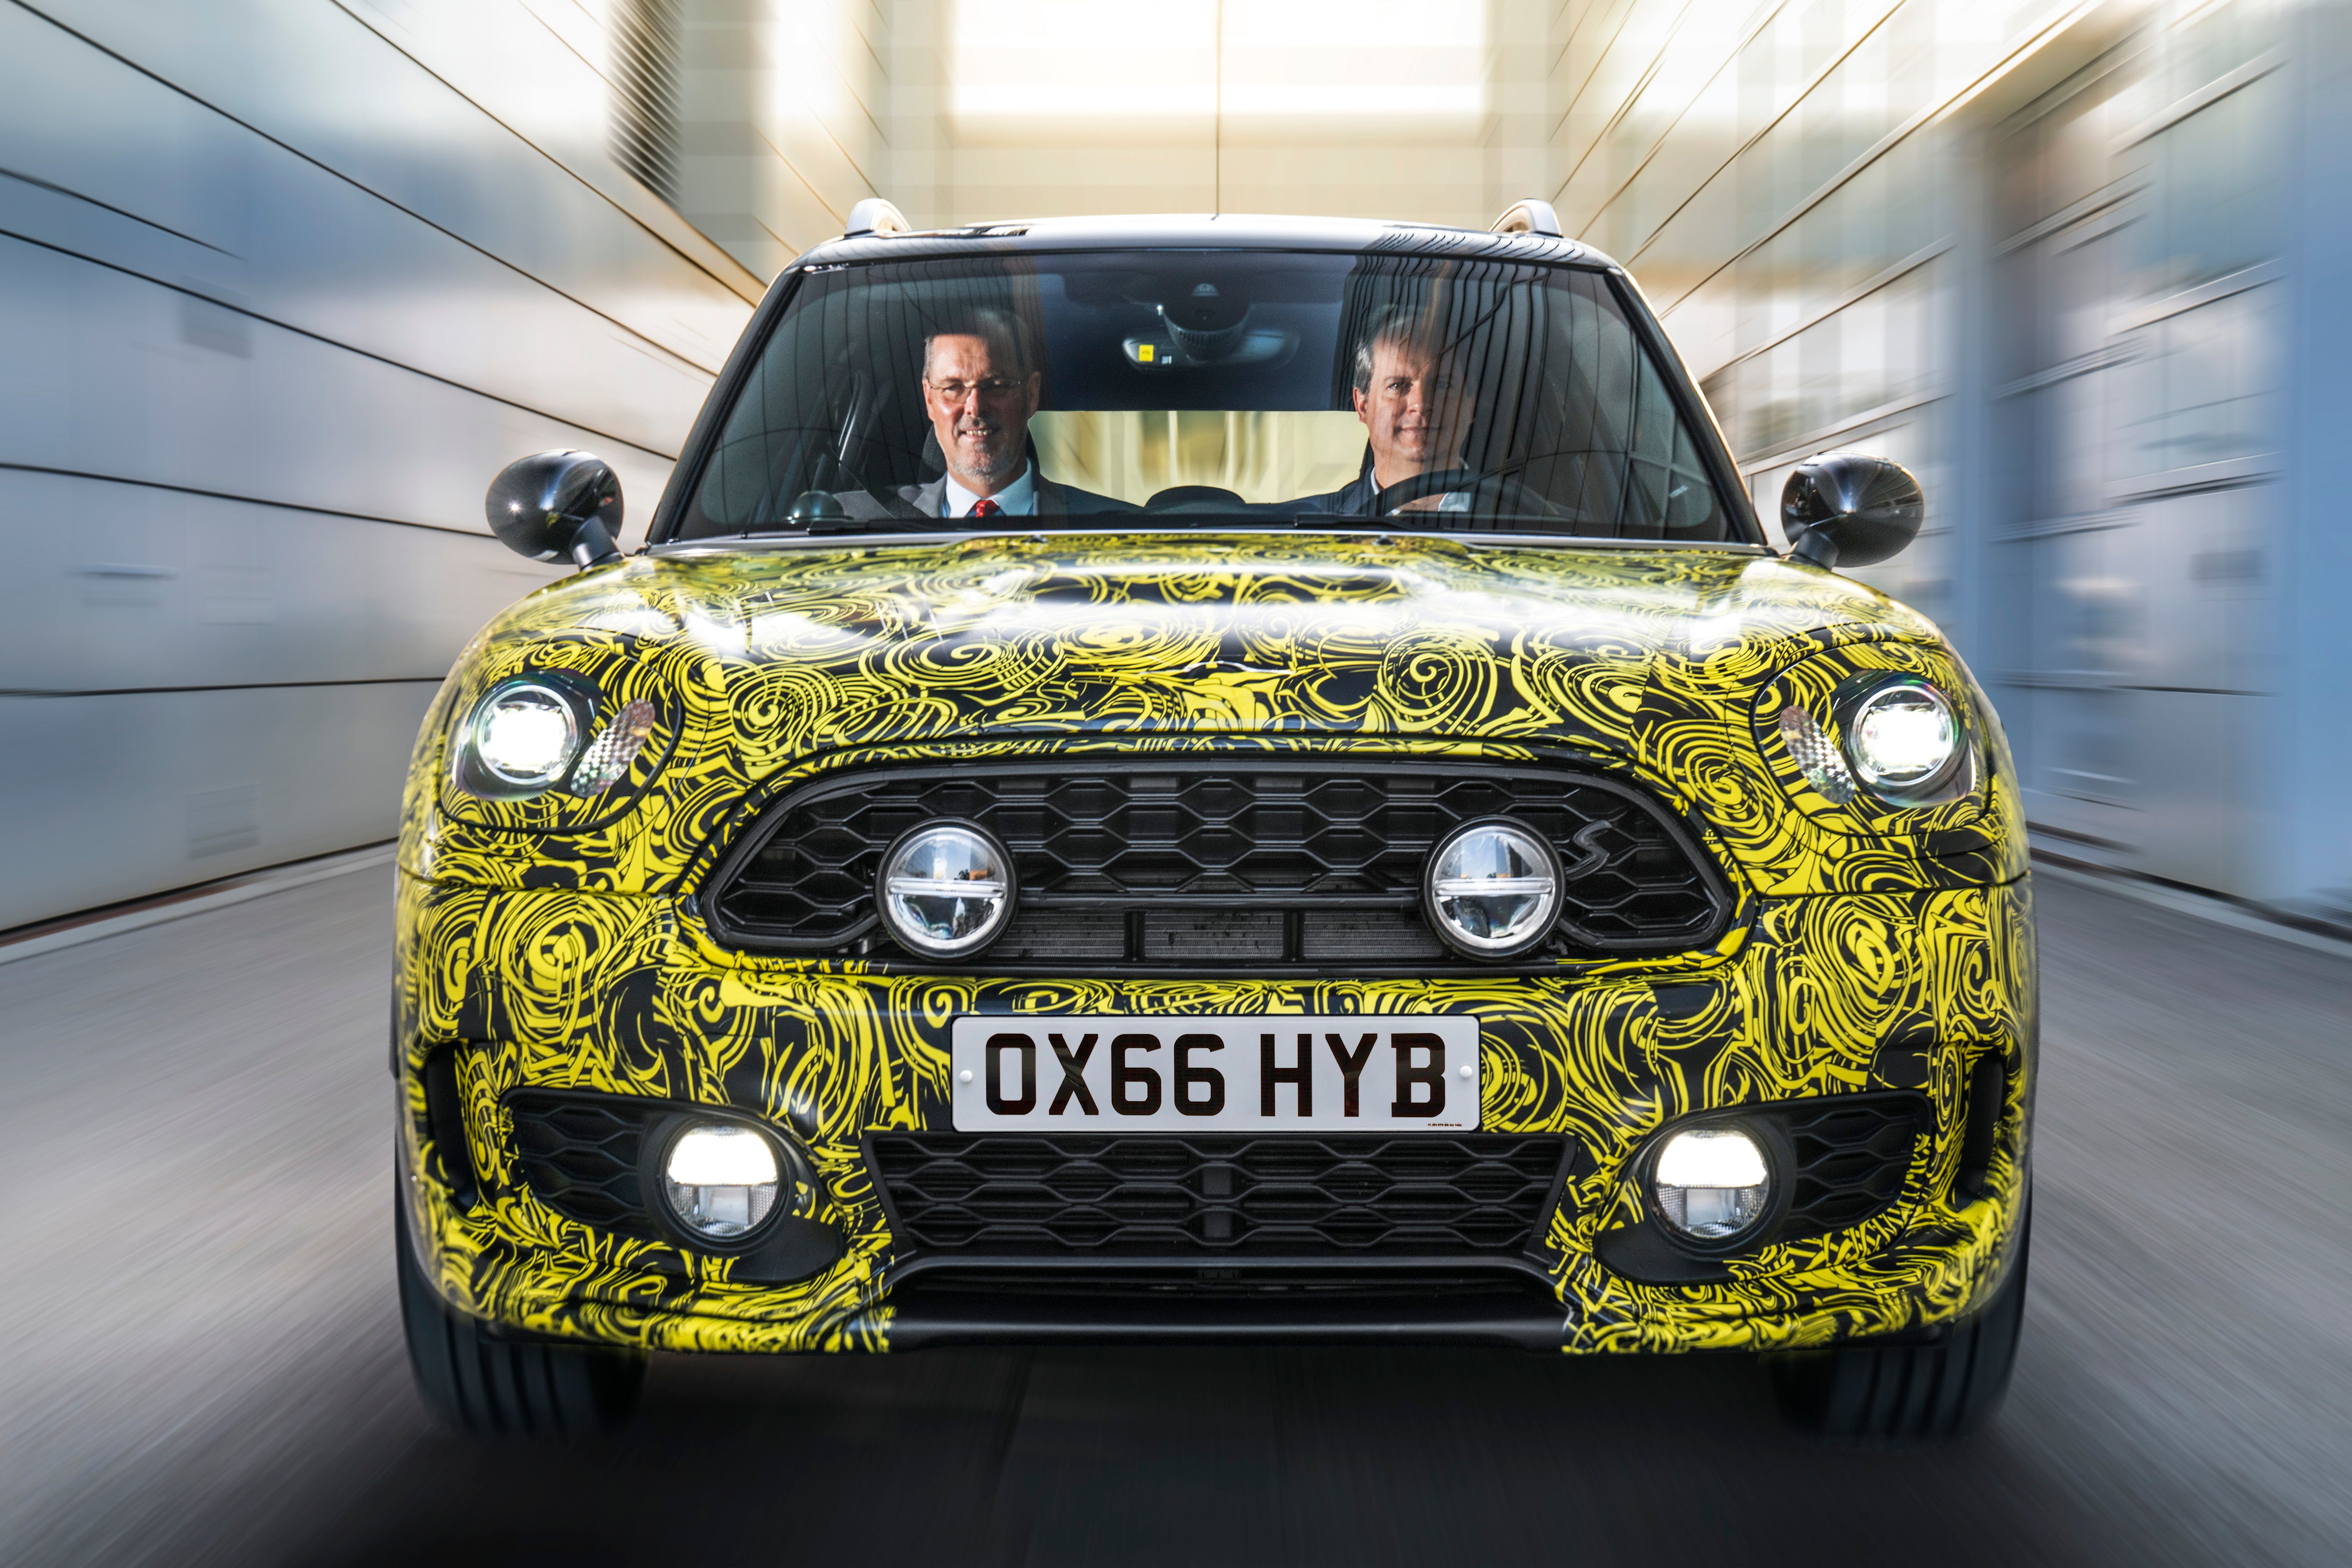 mini s hybrid test car offers a glimpse into an electric future image 1